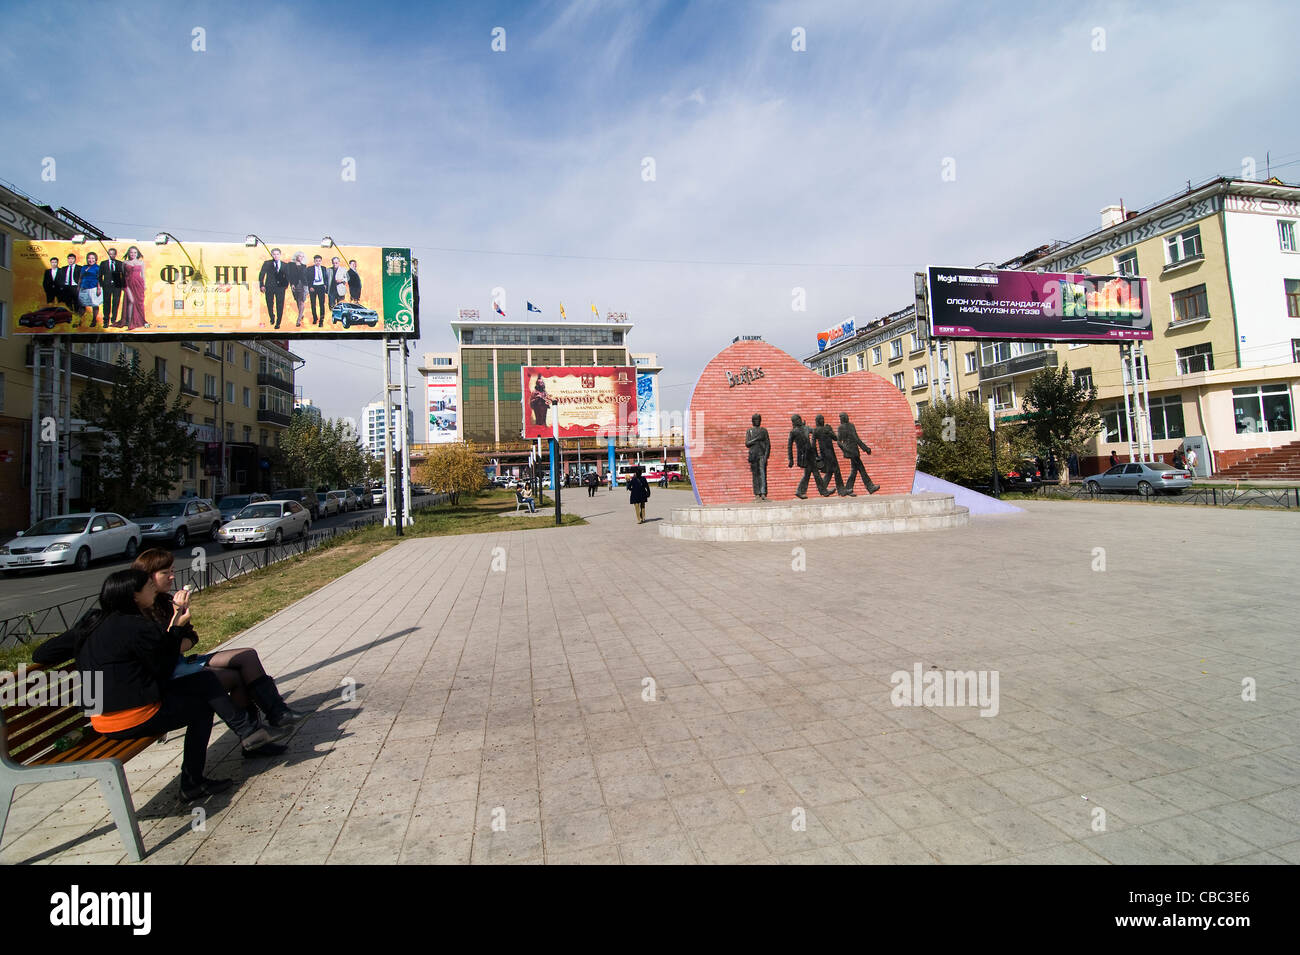 Sculpture of the Beatles in central Ulan Bator. Stock Photo